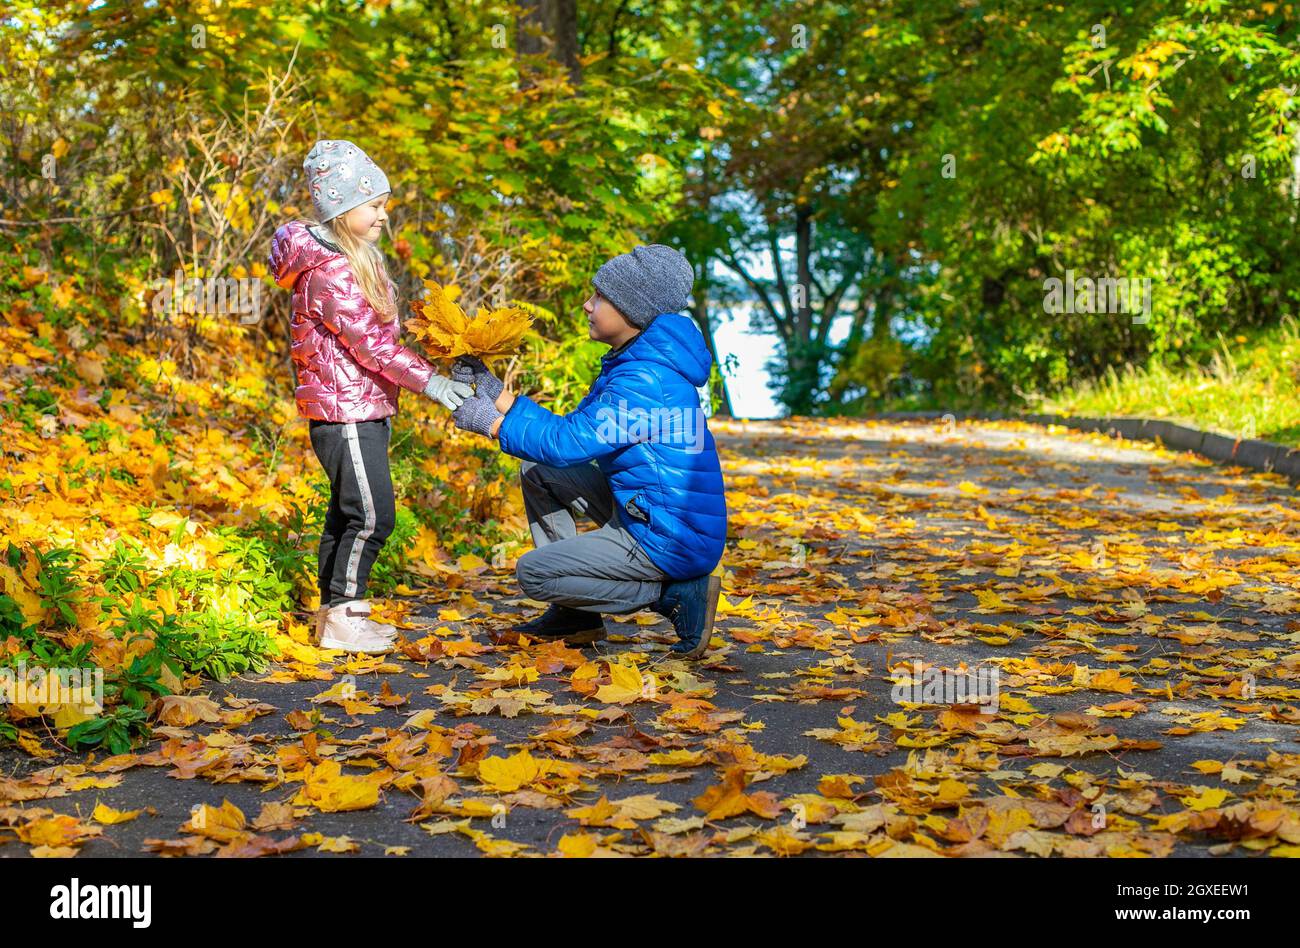 A boy squatting down gives a bouquet of yellow maple leaves a girl Stock Photo